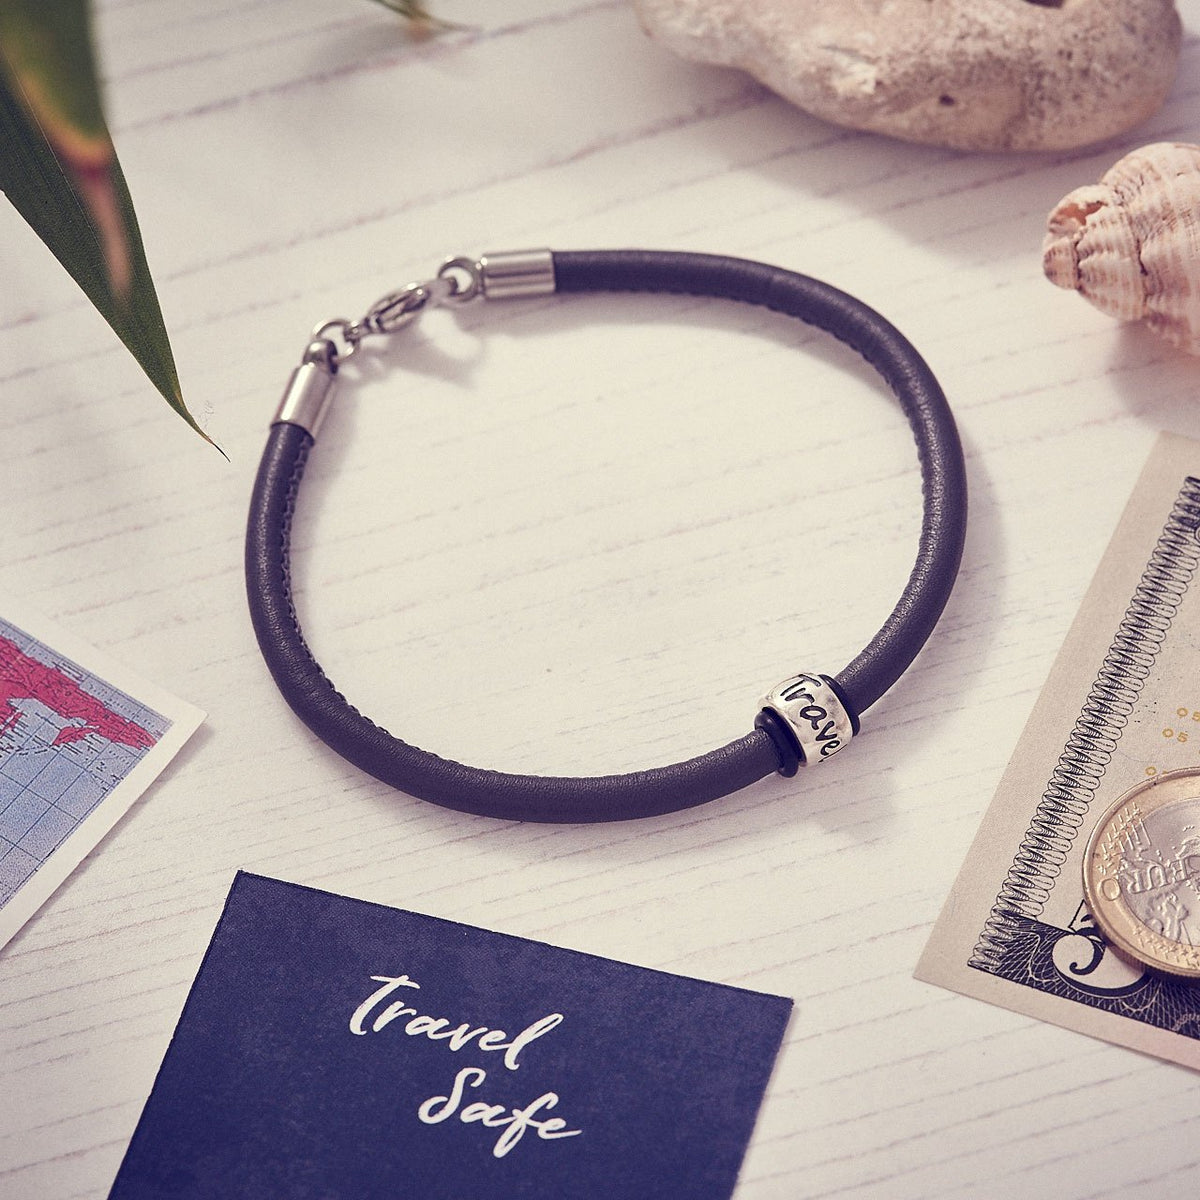 Travel Safe Silver &amp; Italian Stitched Leather Bracelet - alternative travel gift from Off The map Brighton